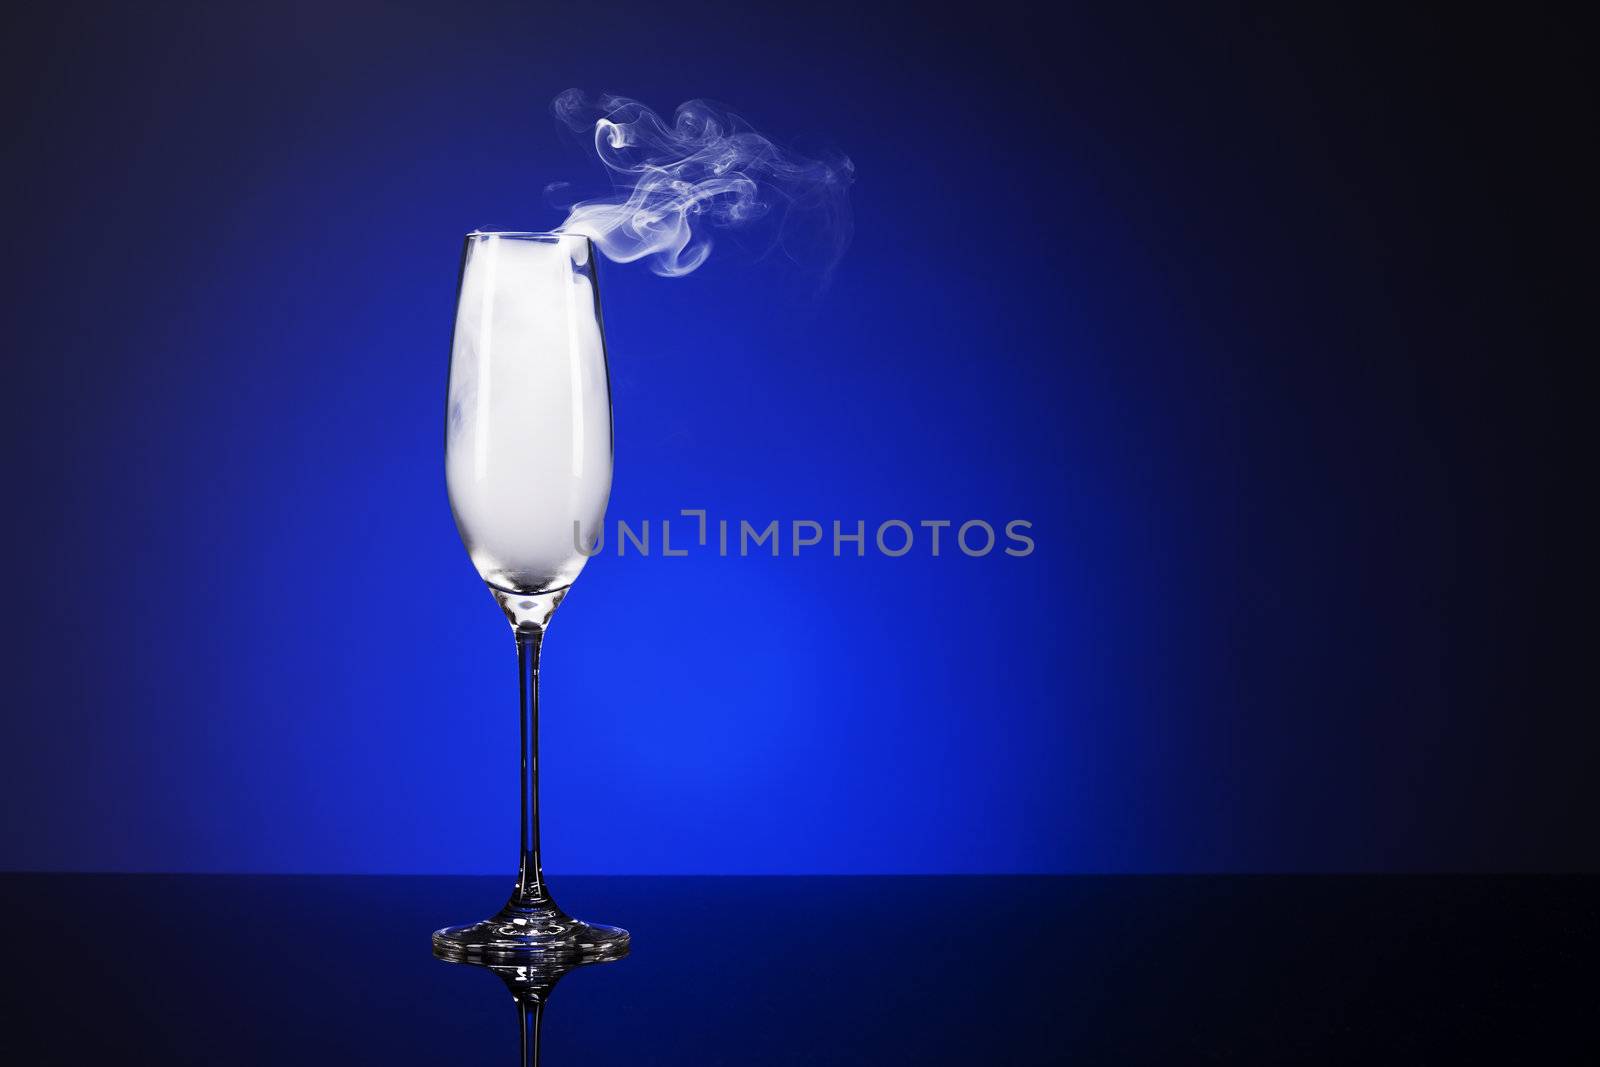 smoking champagne glass on a mirror with blue background light